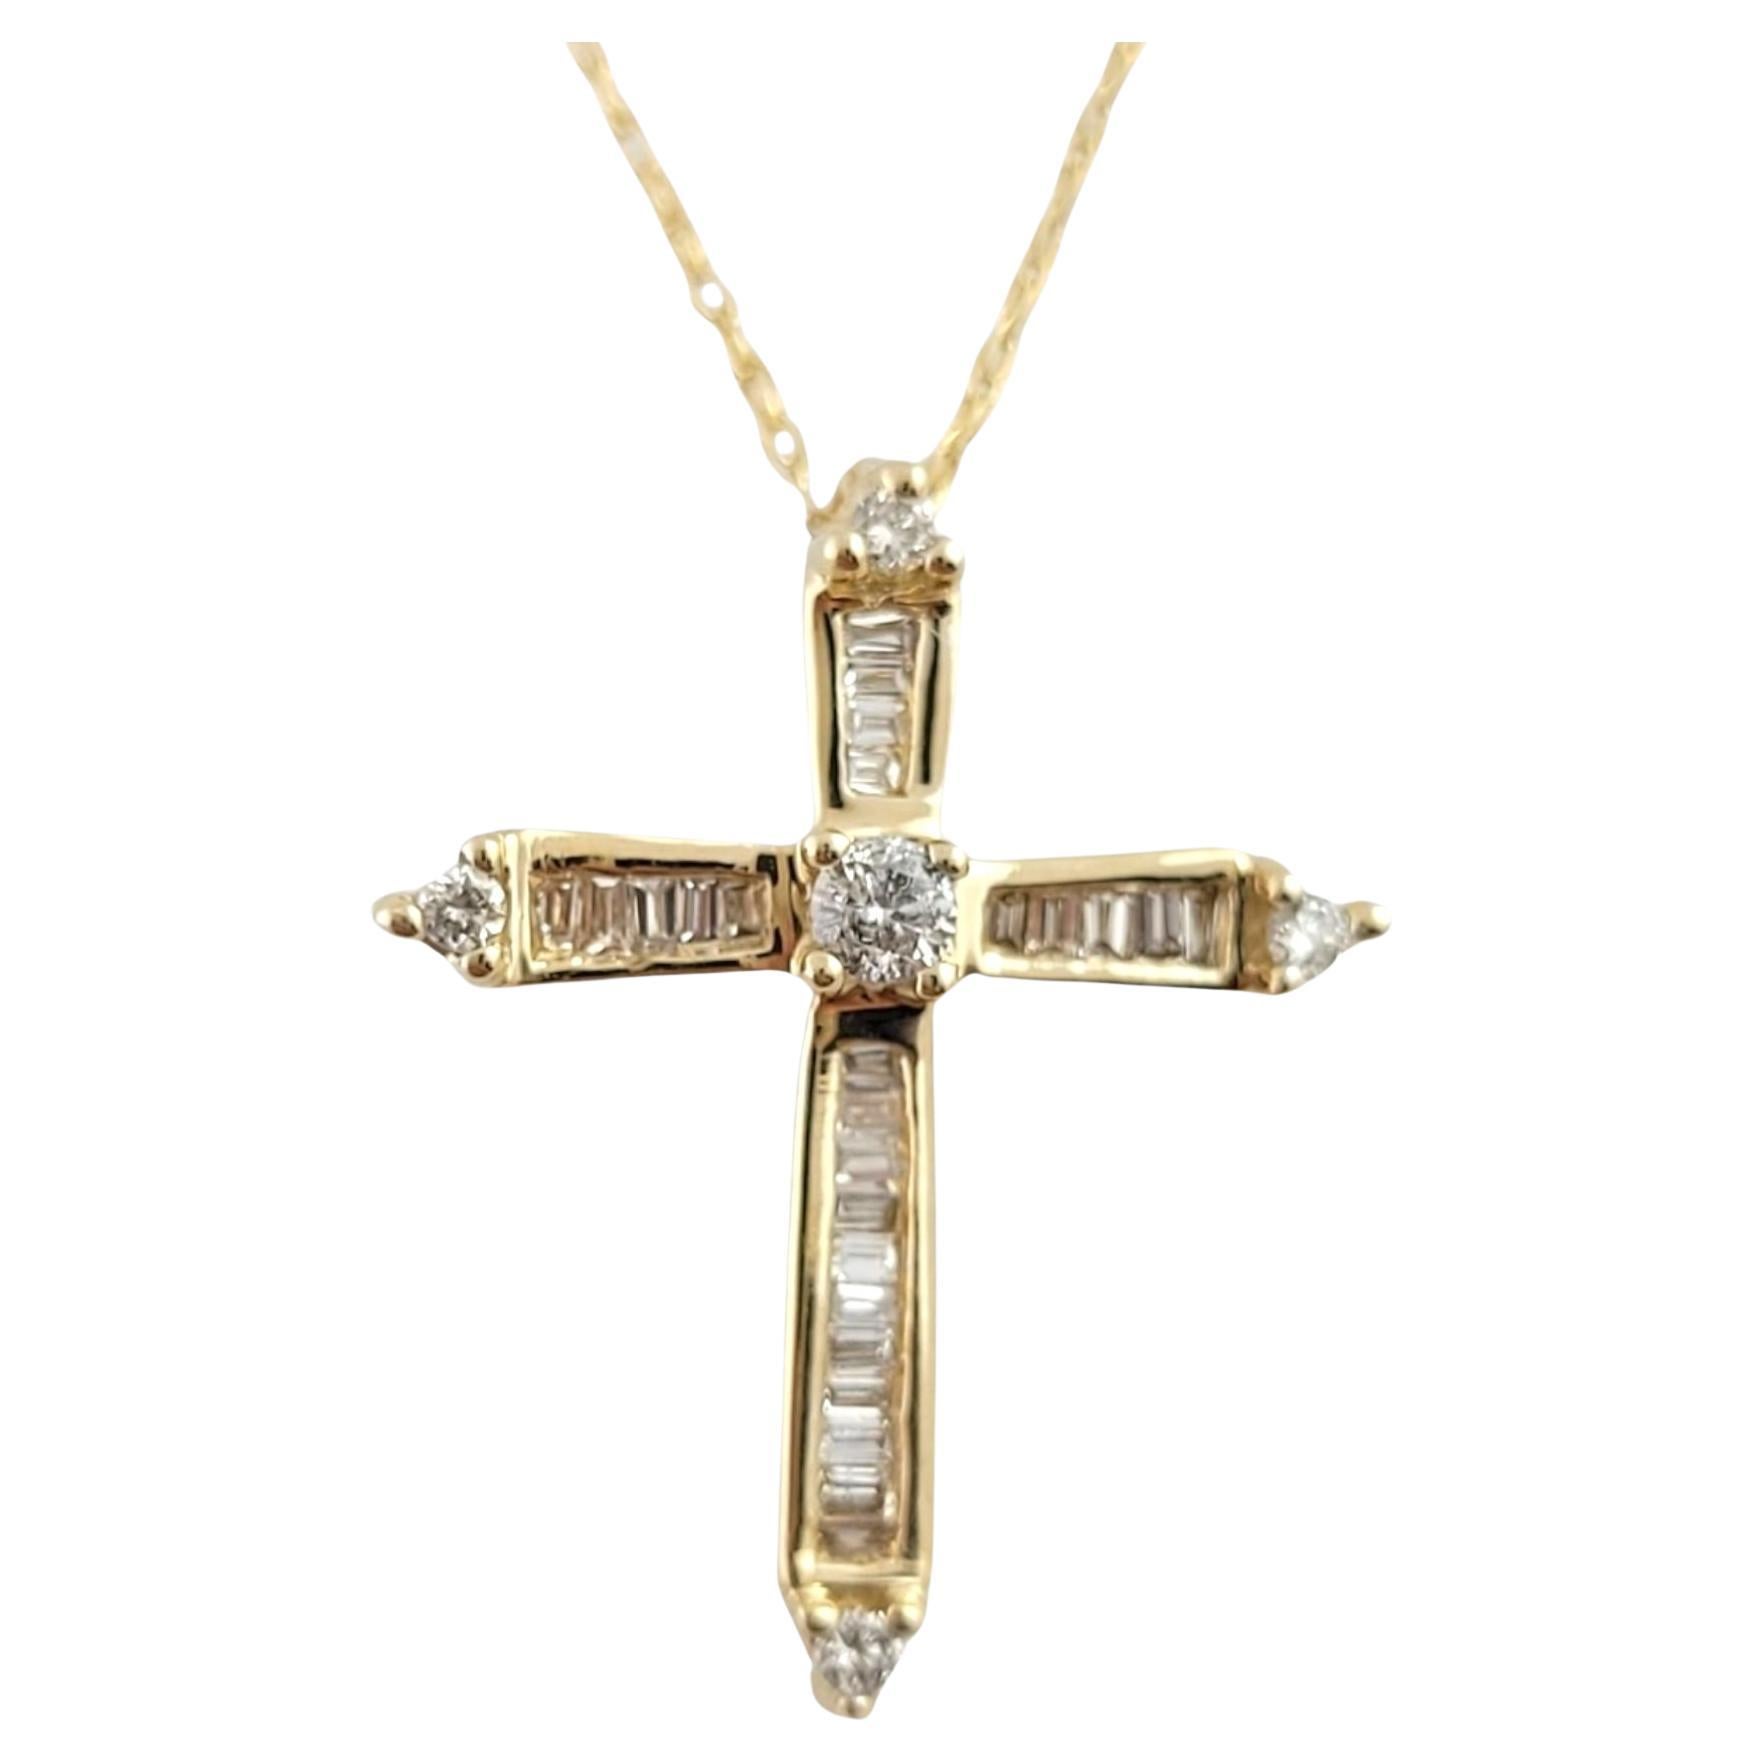 This gorgeous 14K gold chain necklace features a beautiful cross pendant decorated with 25 sparkling, baguette cut diamond and 5 round cut diamonds for a perfect finish!

Approximate total diamond weight: .29 cts

Diamond clarity: SI1-I1

Diamond